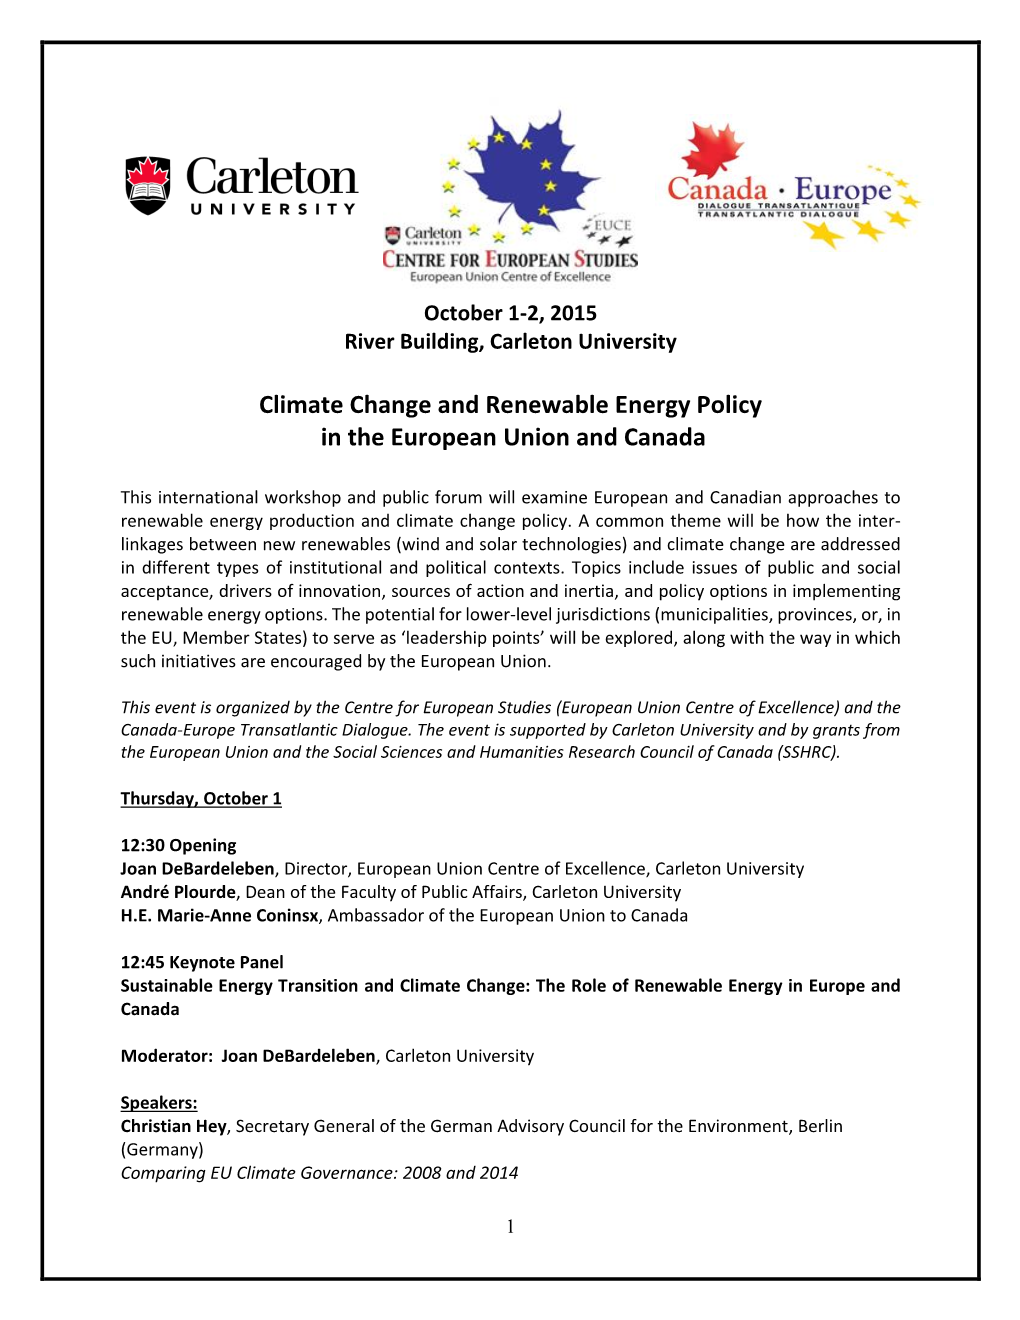 Climate Change and Renewable Energy Policy in the European Union and Canada